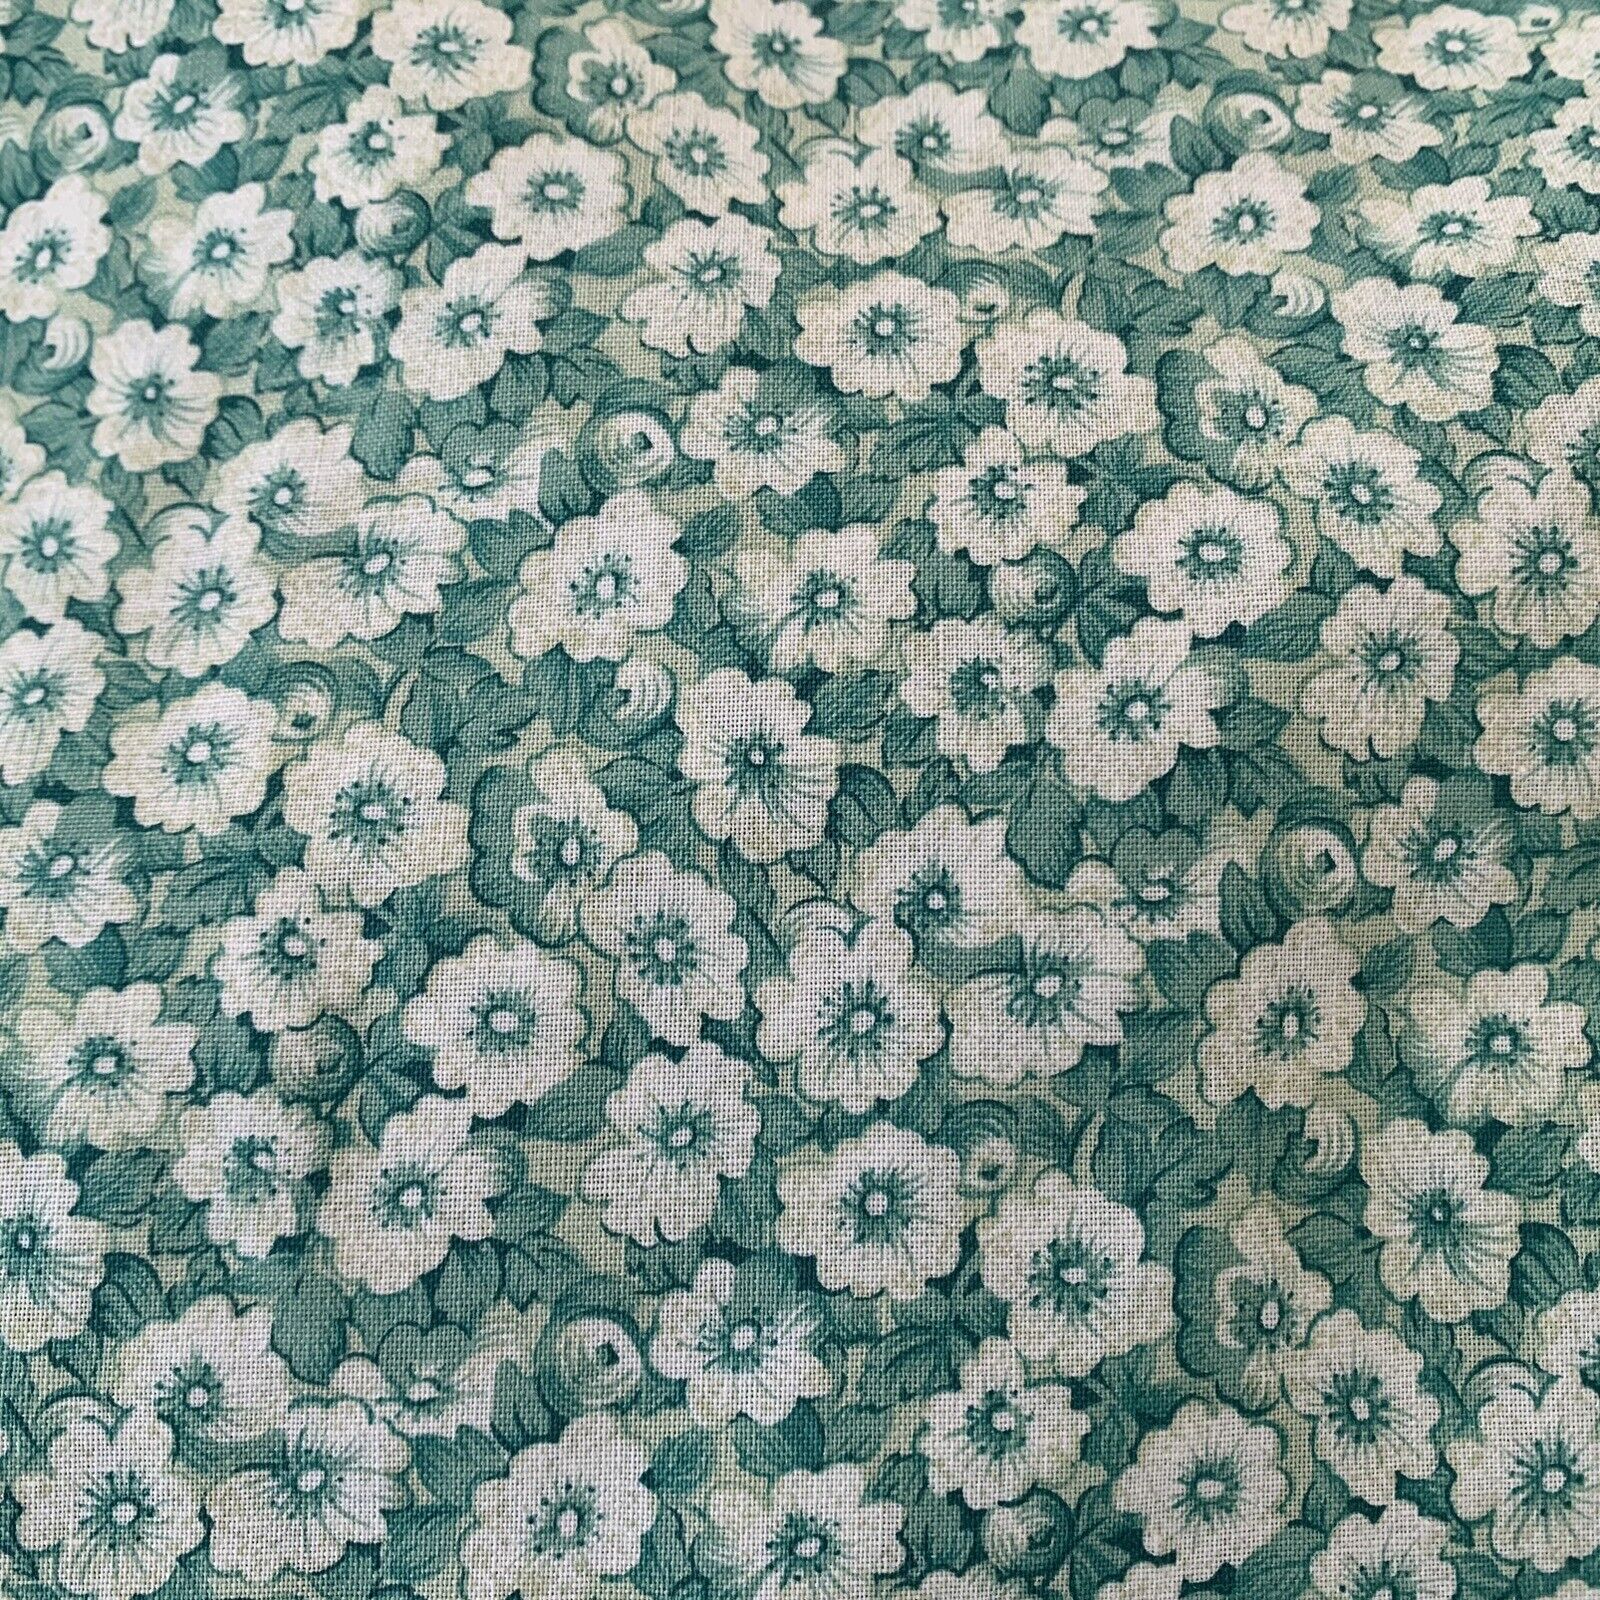 Vtg Peter Pan Green Floral Fabric Quilting Crafts 1.5 Yards